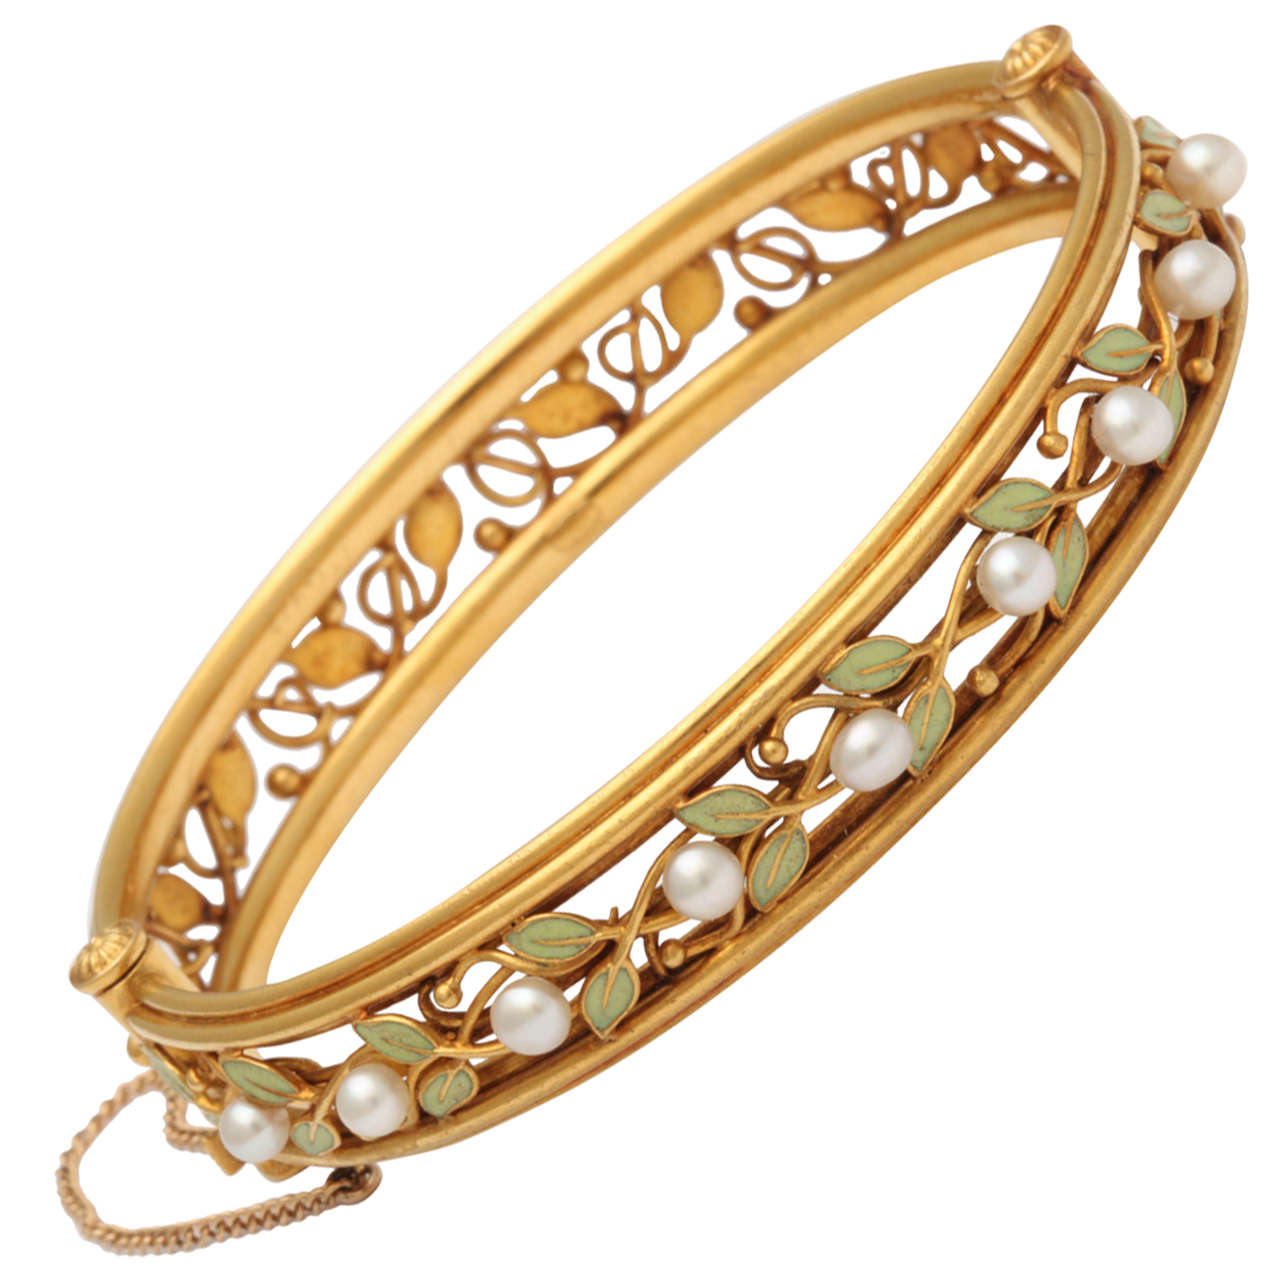 Rare Arts & Crafts bangle bracelet designed as an openwork vine of 18k gold and green enameled leaves, the upper half enhanced with freshwater pearls. The gold bracelet opens on a hinge and is fitted with a plunger clasp. A masterpiece of American